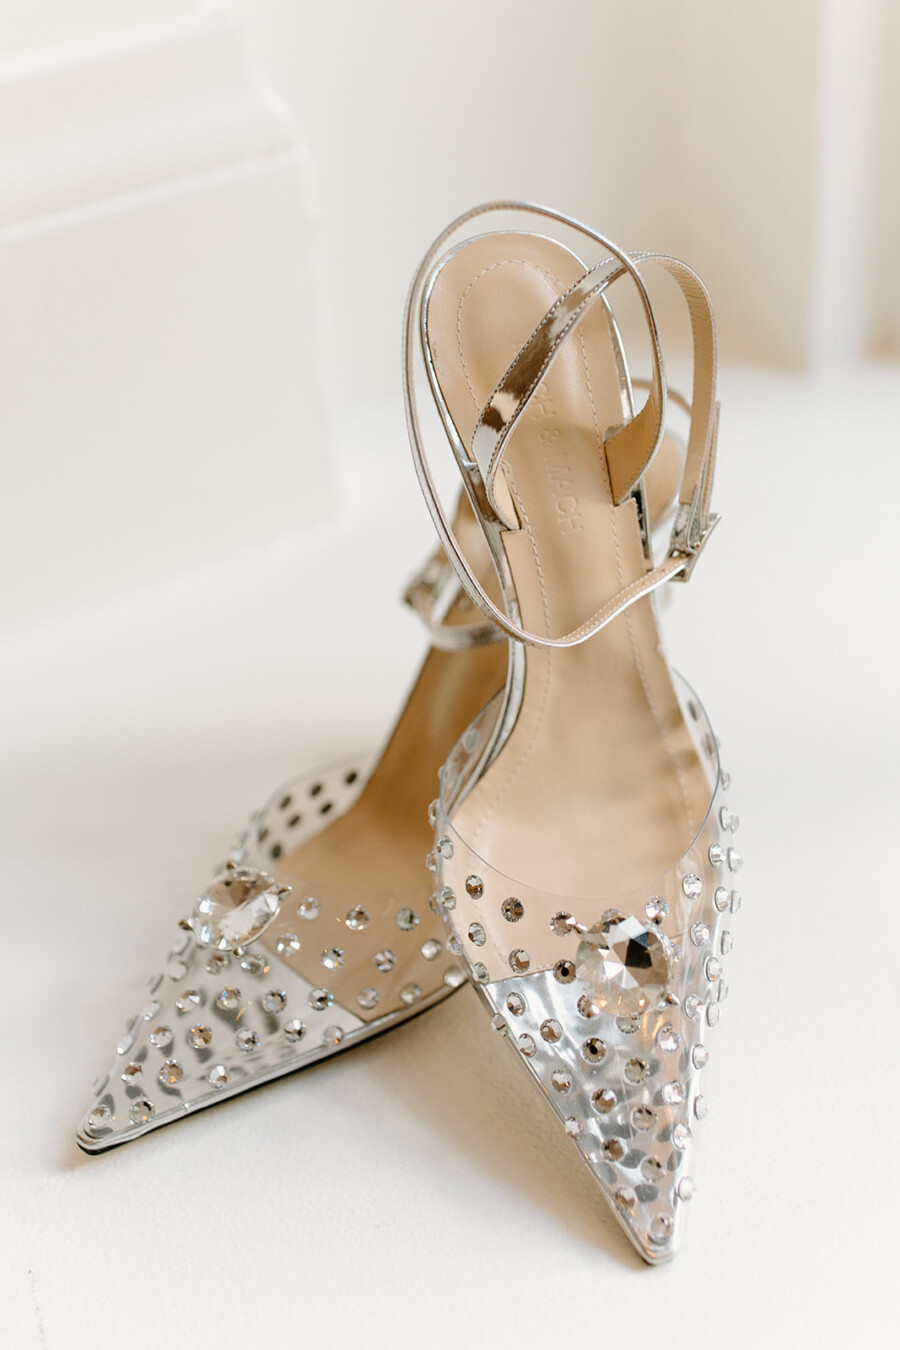 Embellished wedding shoes with pointed toe